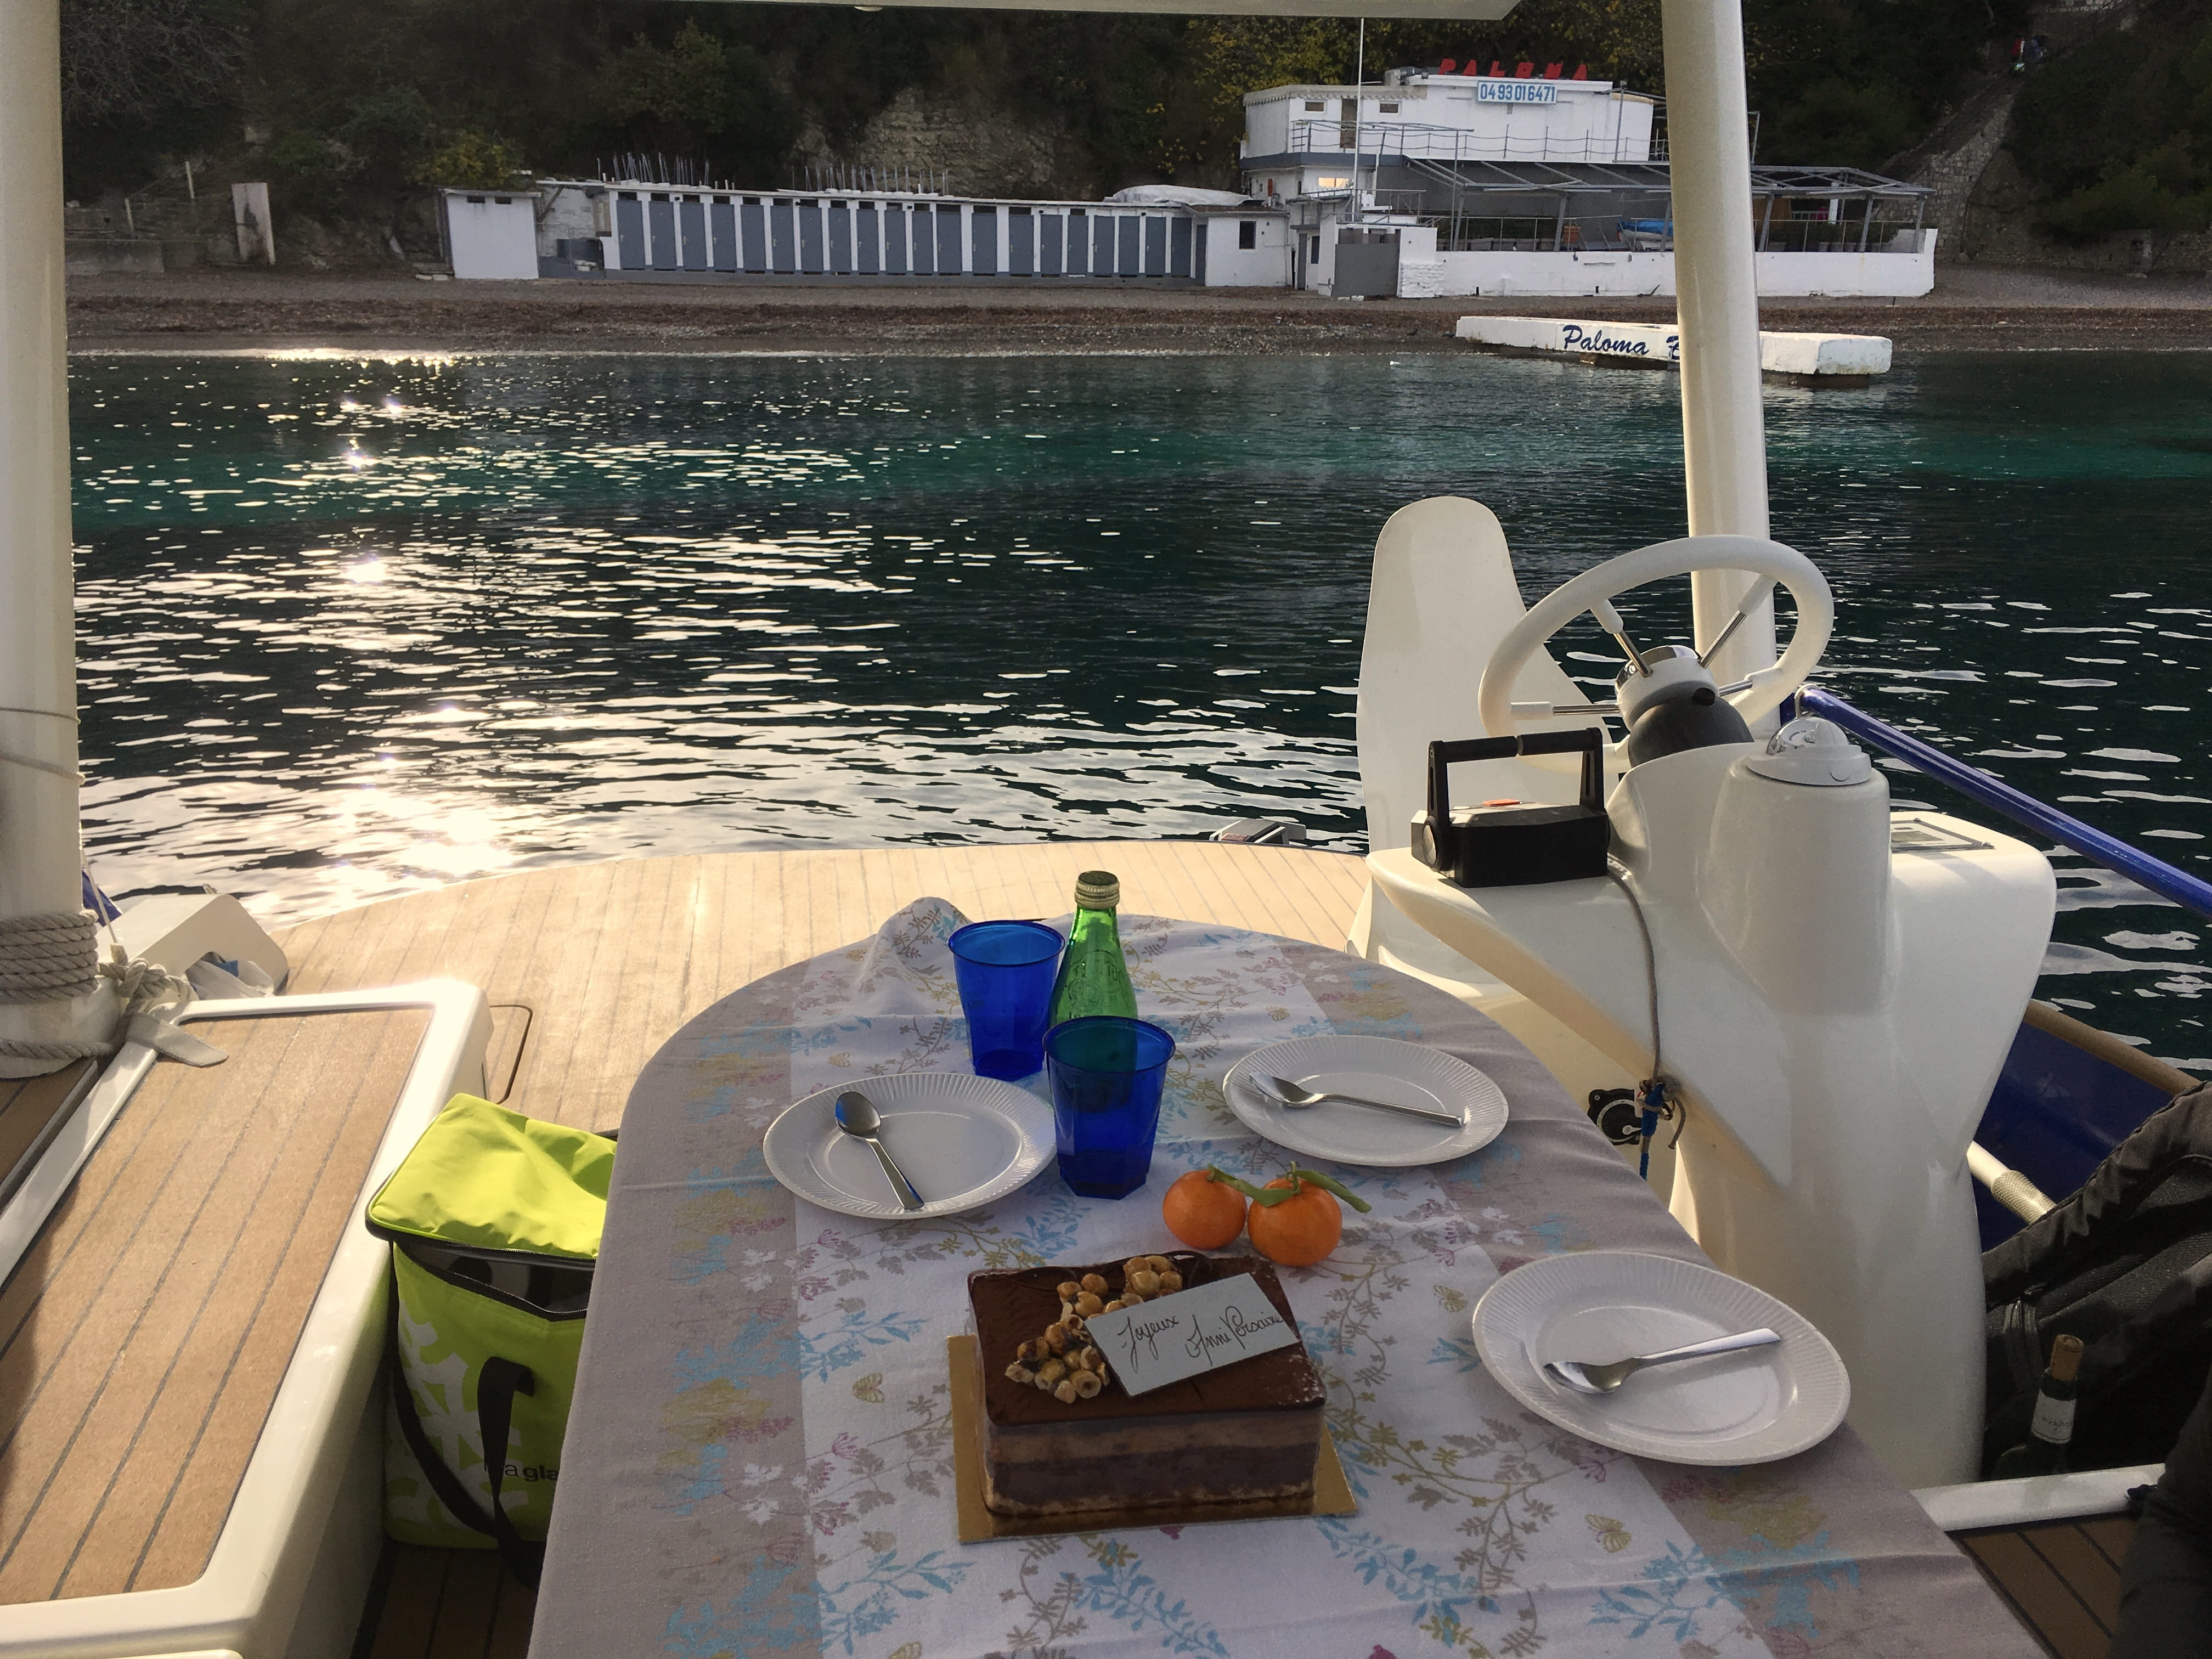 Tasting a birthday cake with family on the seaZen solar boat